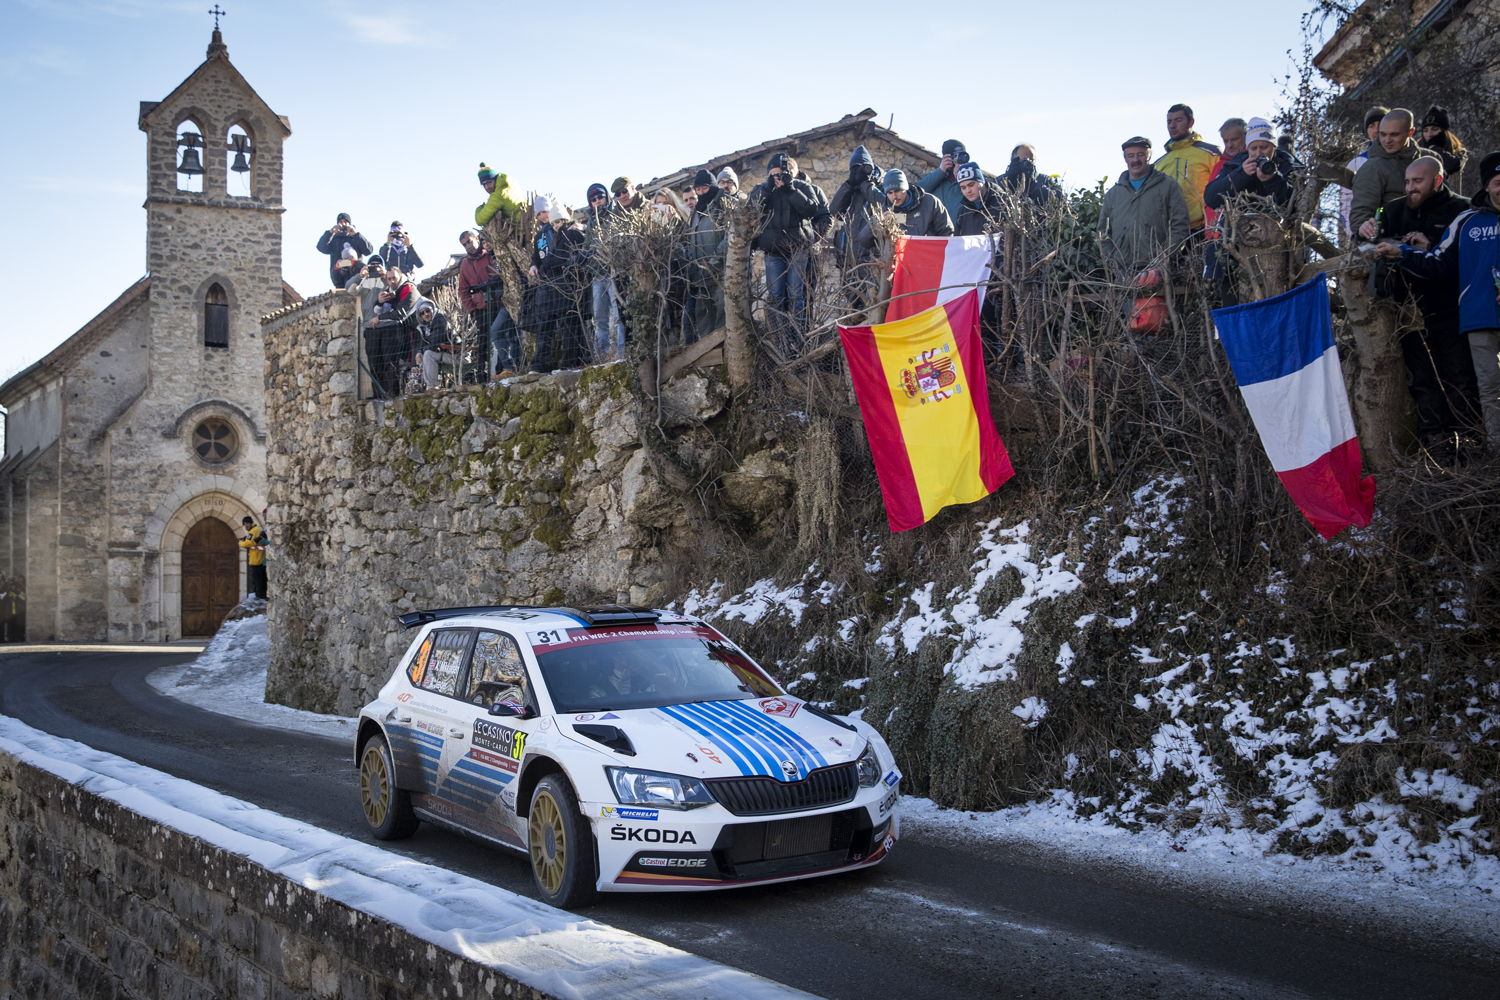 World Championship stars Andreas Mikkelsen and Anders Jæger triumphed at the first attempt in the ŠKODA FABIA R5.